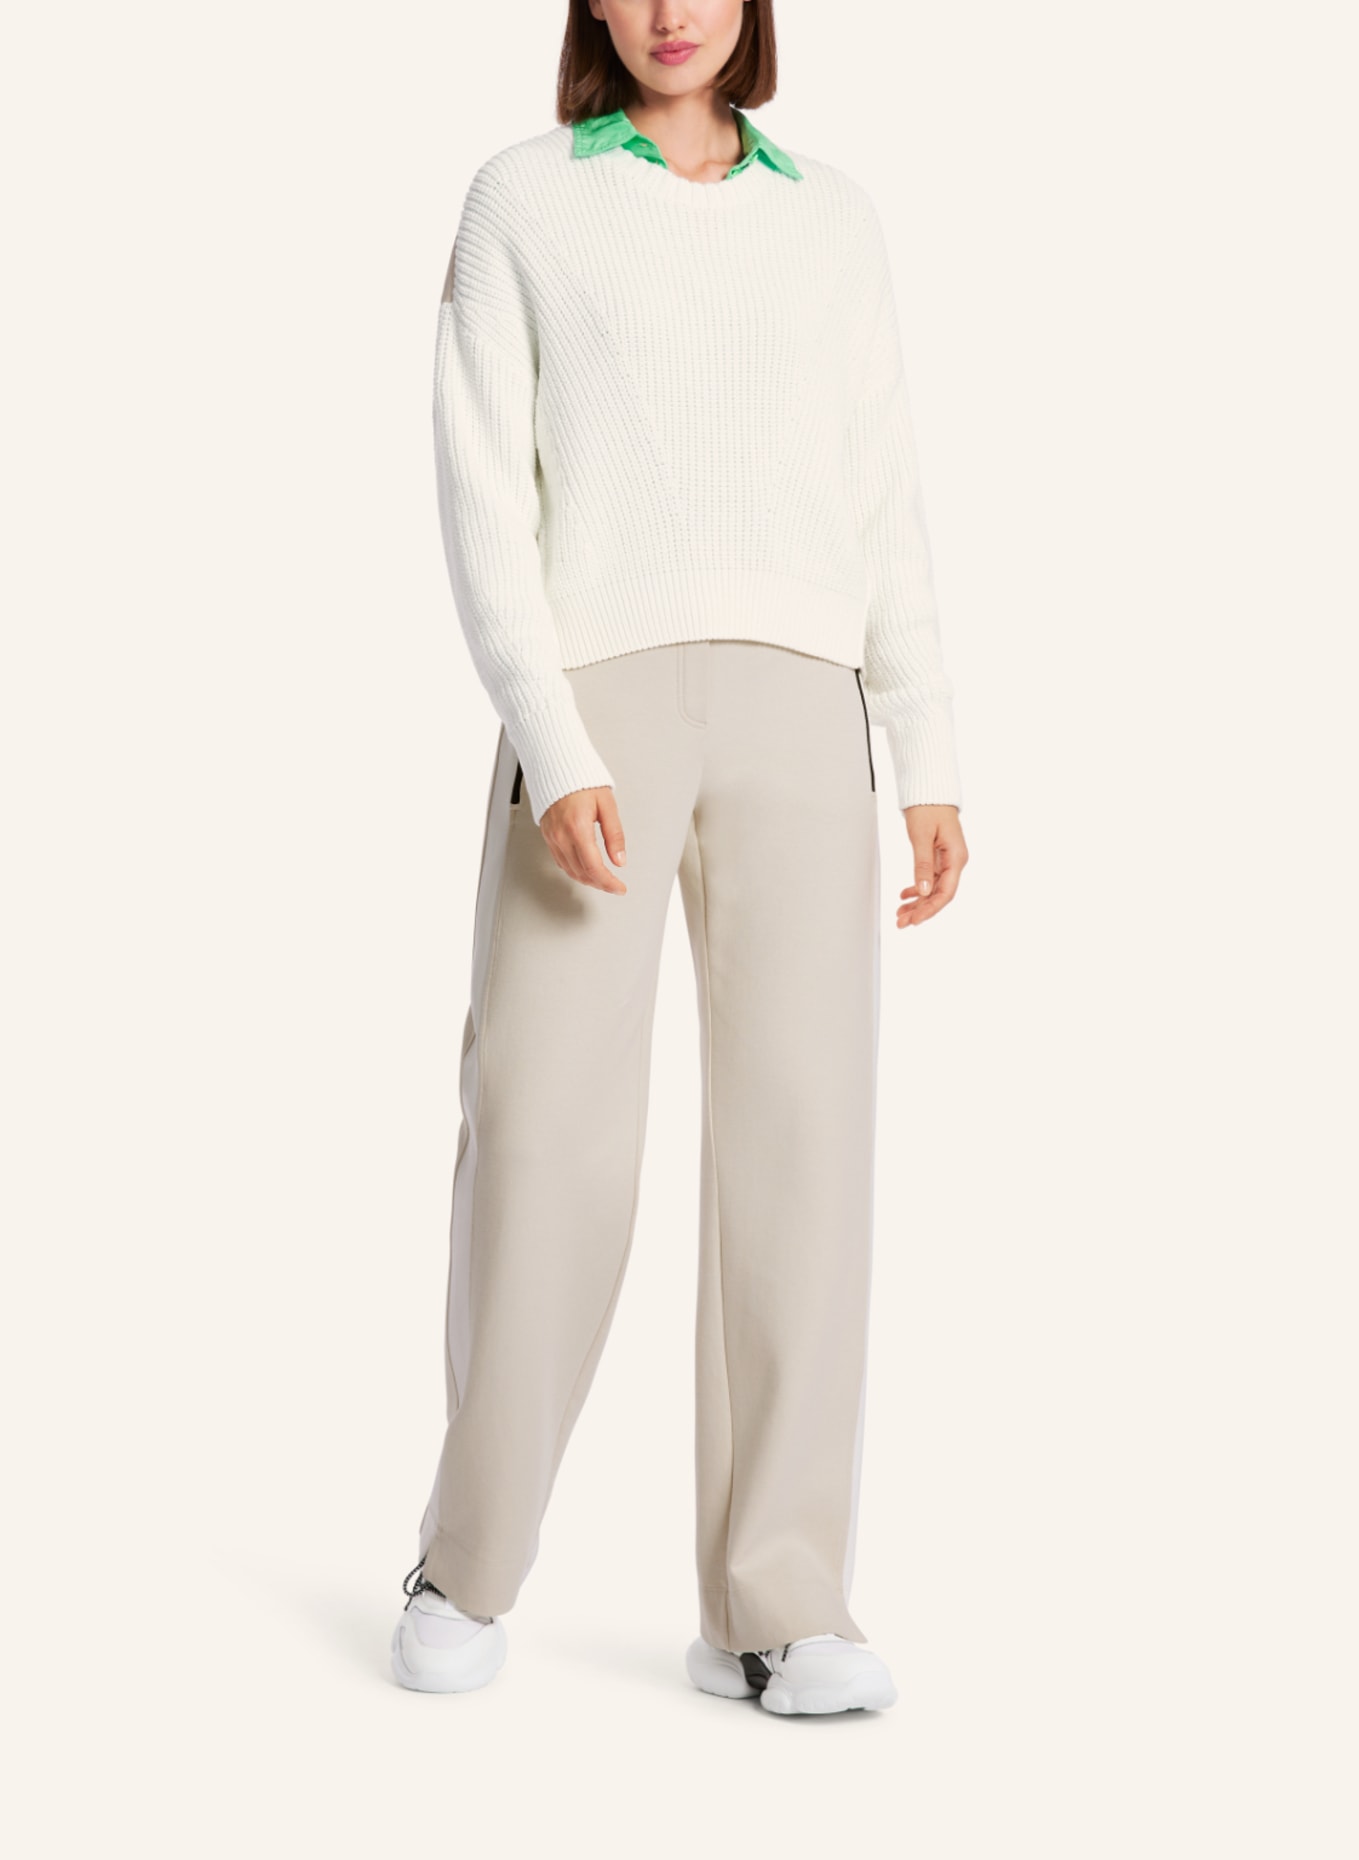 MARC CAIN Pullover, Farbe: WEISS/ CREME (Bild 4)